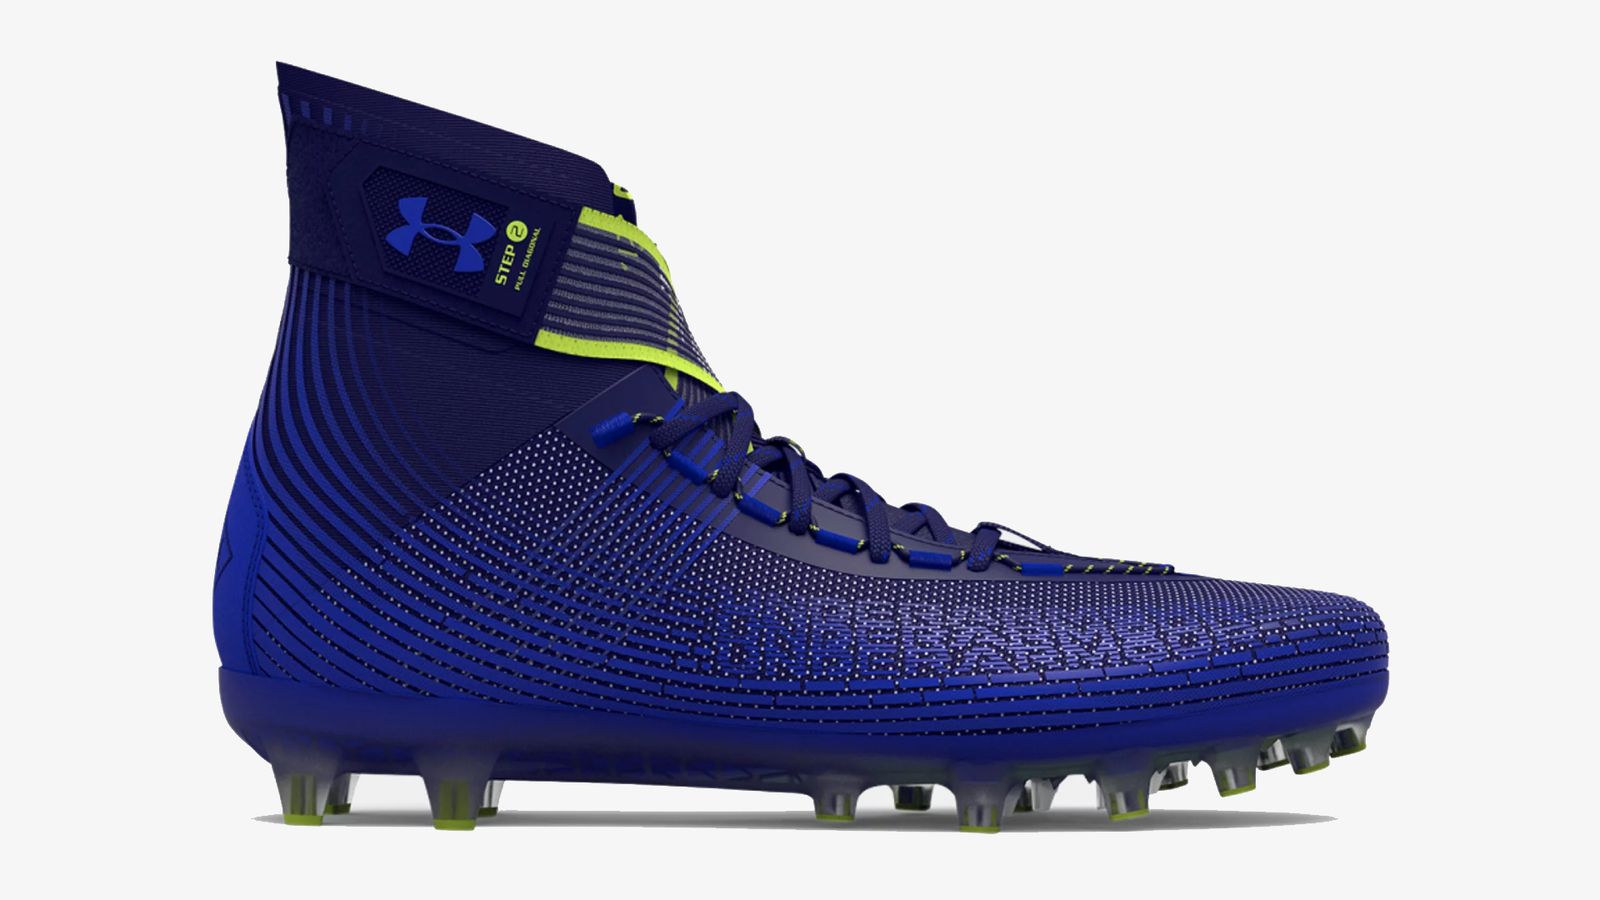 Under Armour Highlight MC product image of a dark blue high-top featuring volt yellow details.